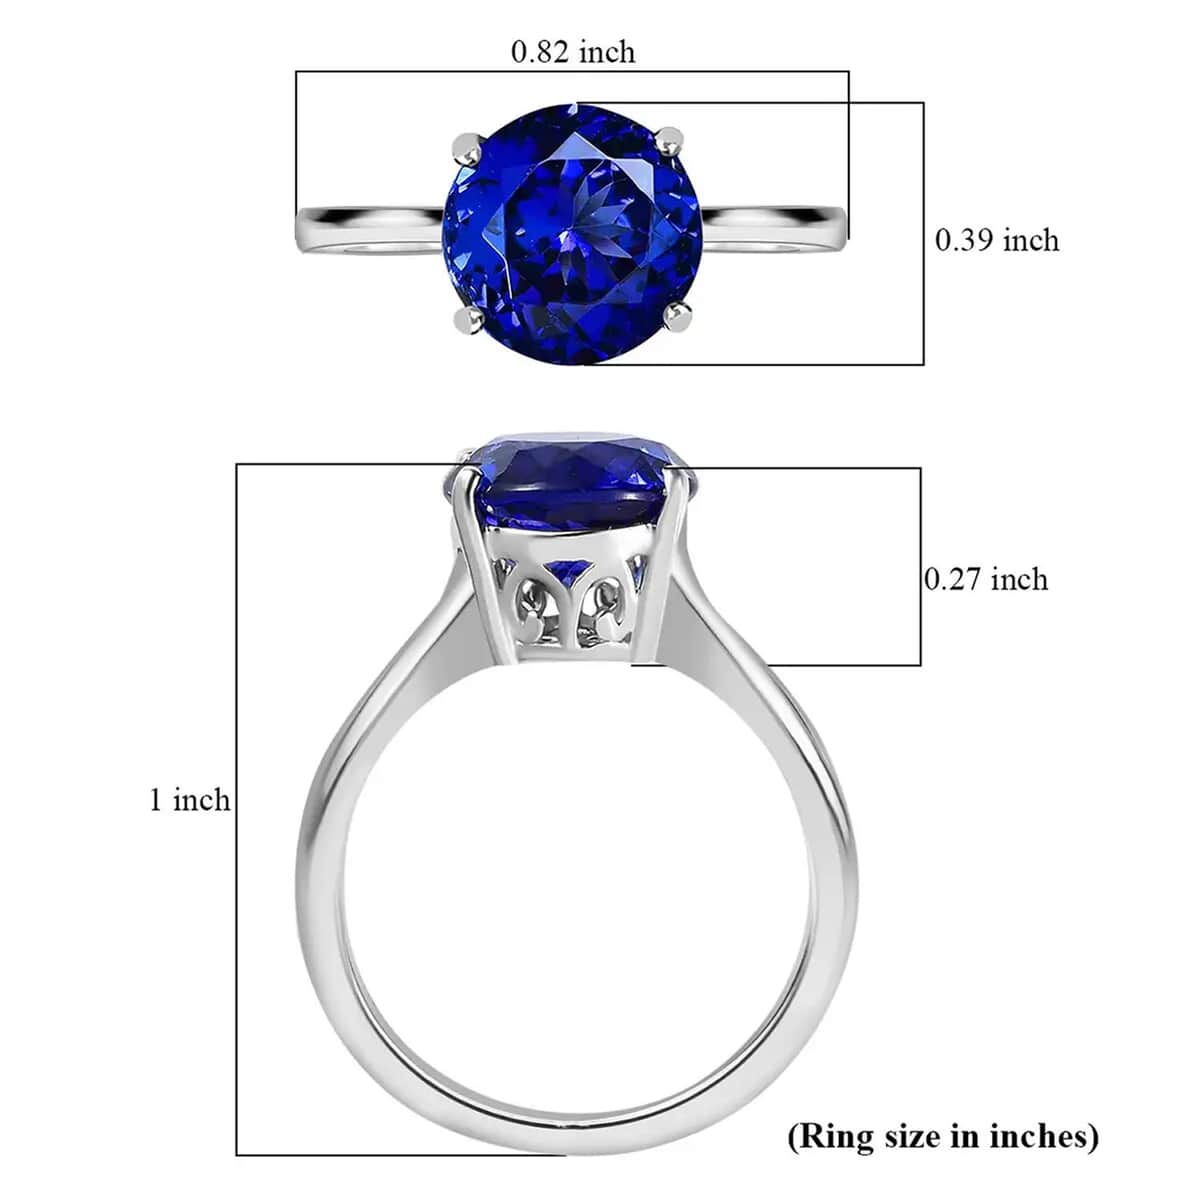 Rhapsody AAAA Tanzanite Ring, 950 Platinum Ring, Tanzanite Solitaire Ring, 950 Platinum Solitaire Ring, Engagement Rings For Women, Promise Ring 4.85 ctw (Size 7.0) image number 5